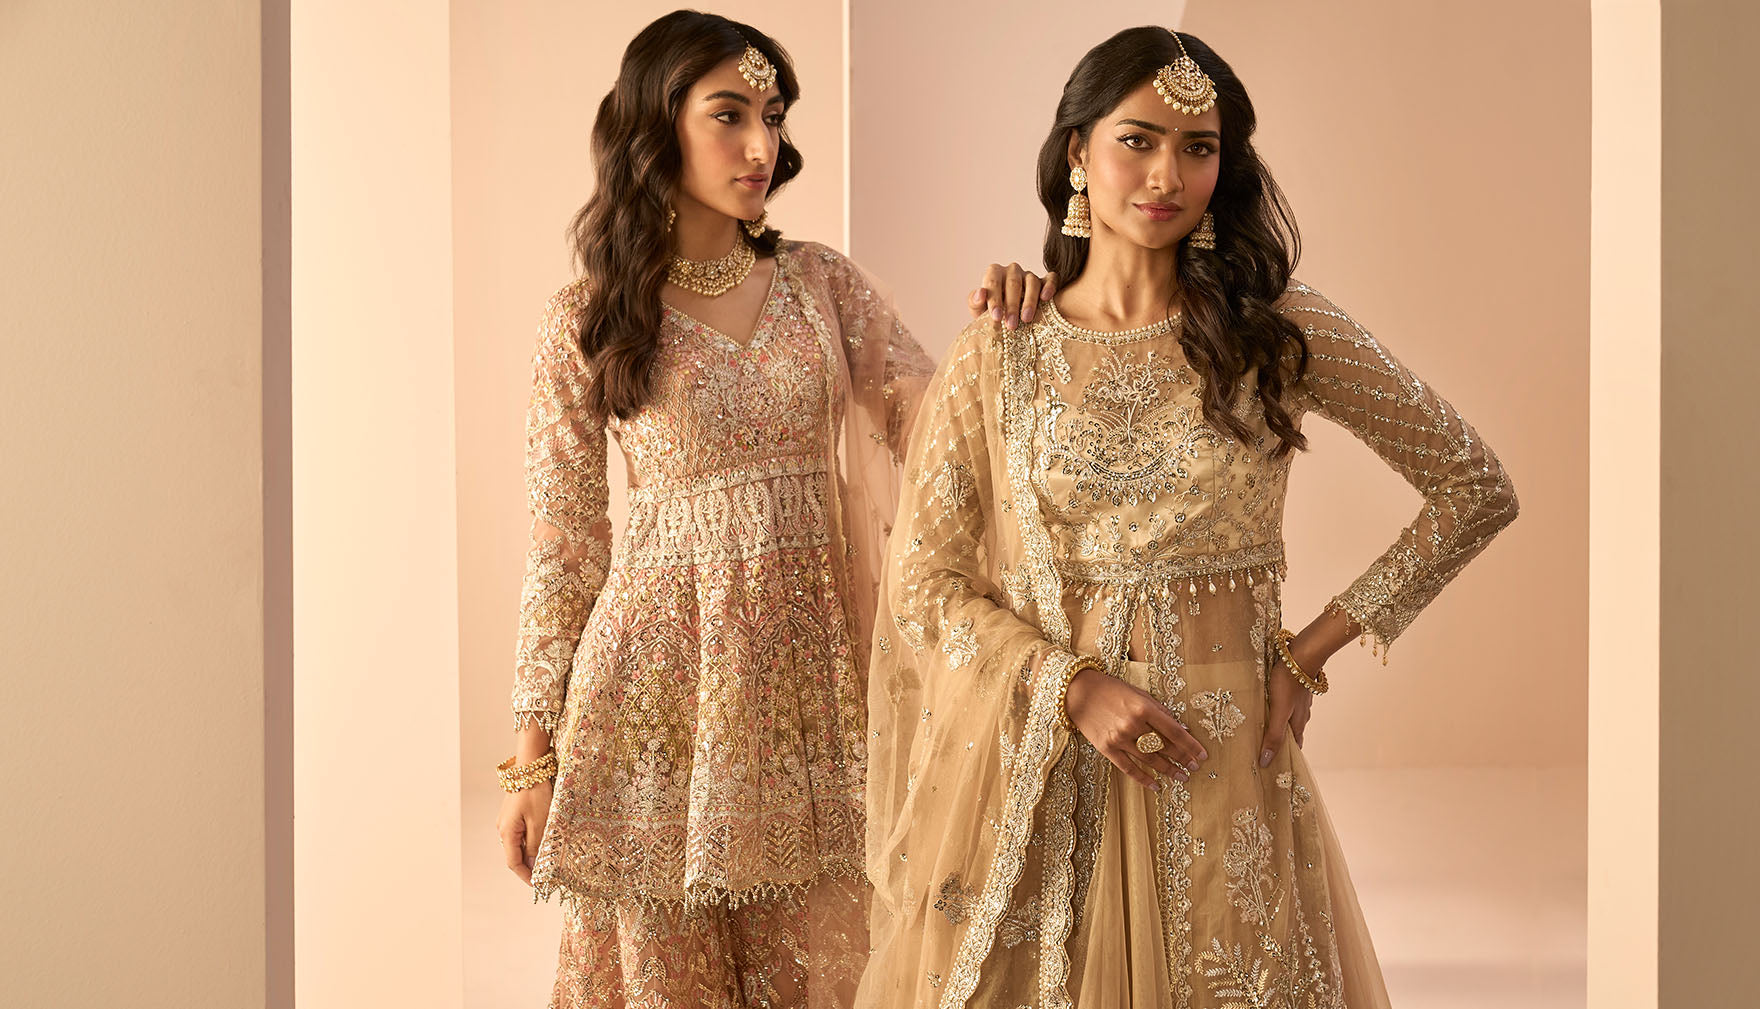 Buy Indian Wedding Dresses Online in USA | Latest Indian Wedding Outfits